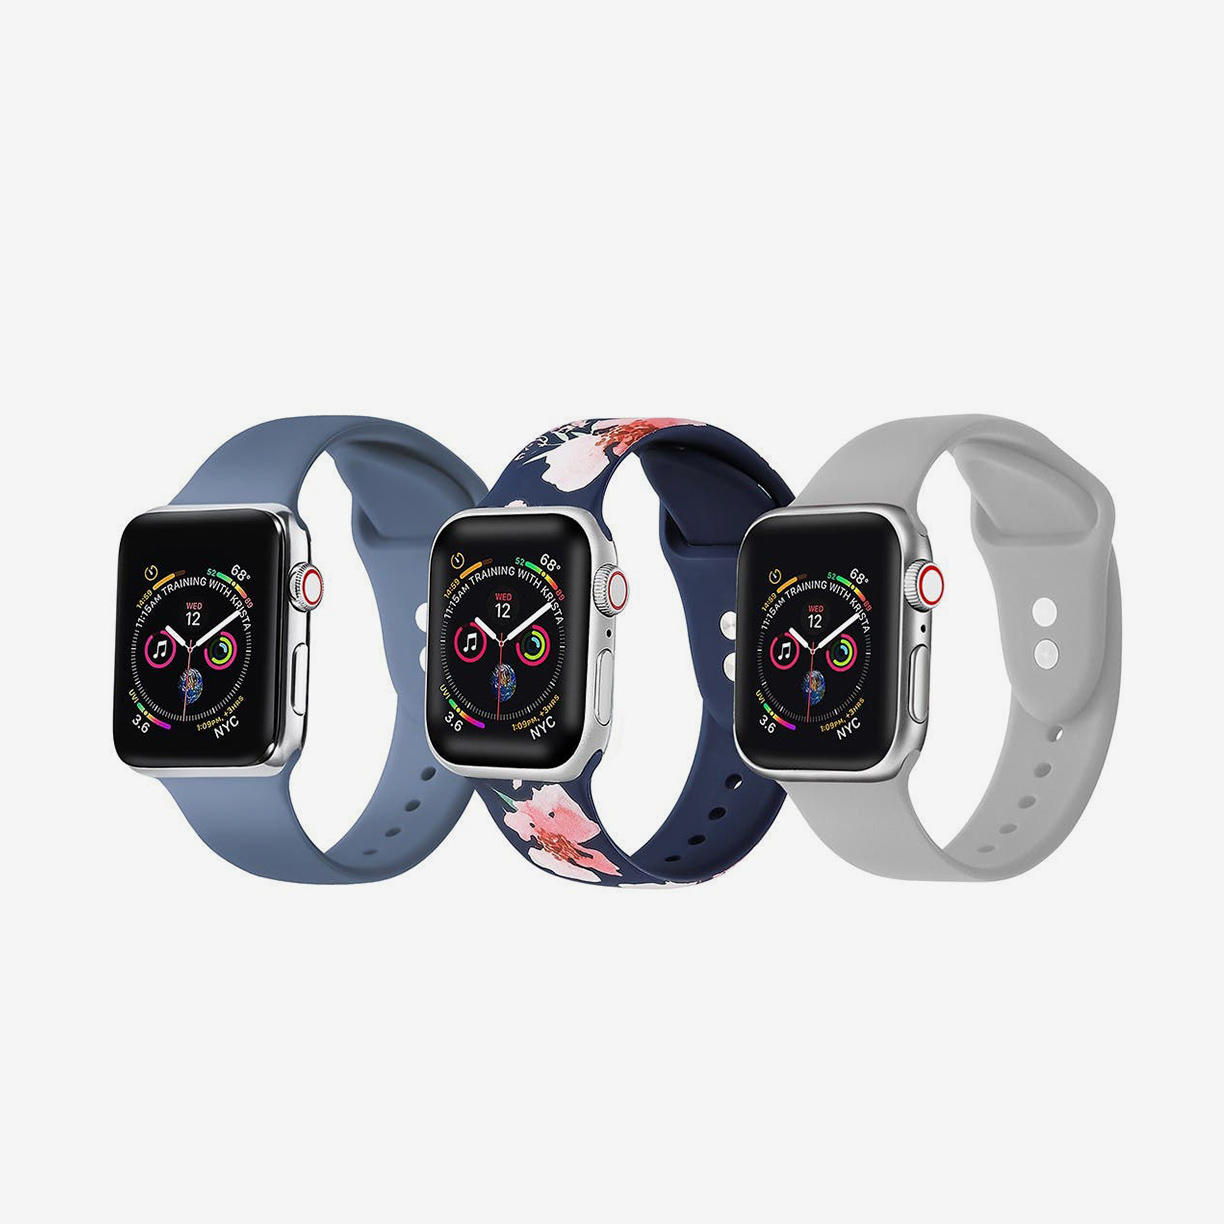 Refurbished Apple Watches and More Up to 50% Off